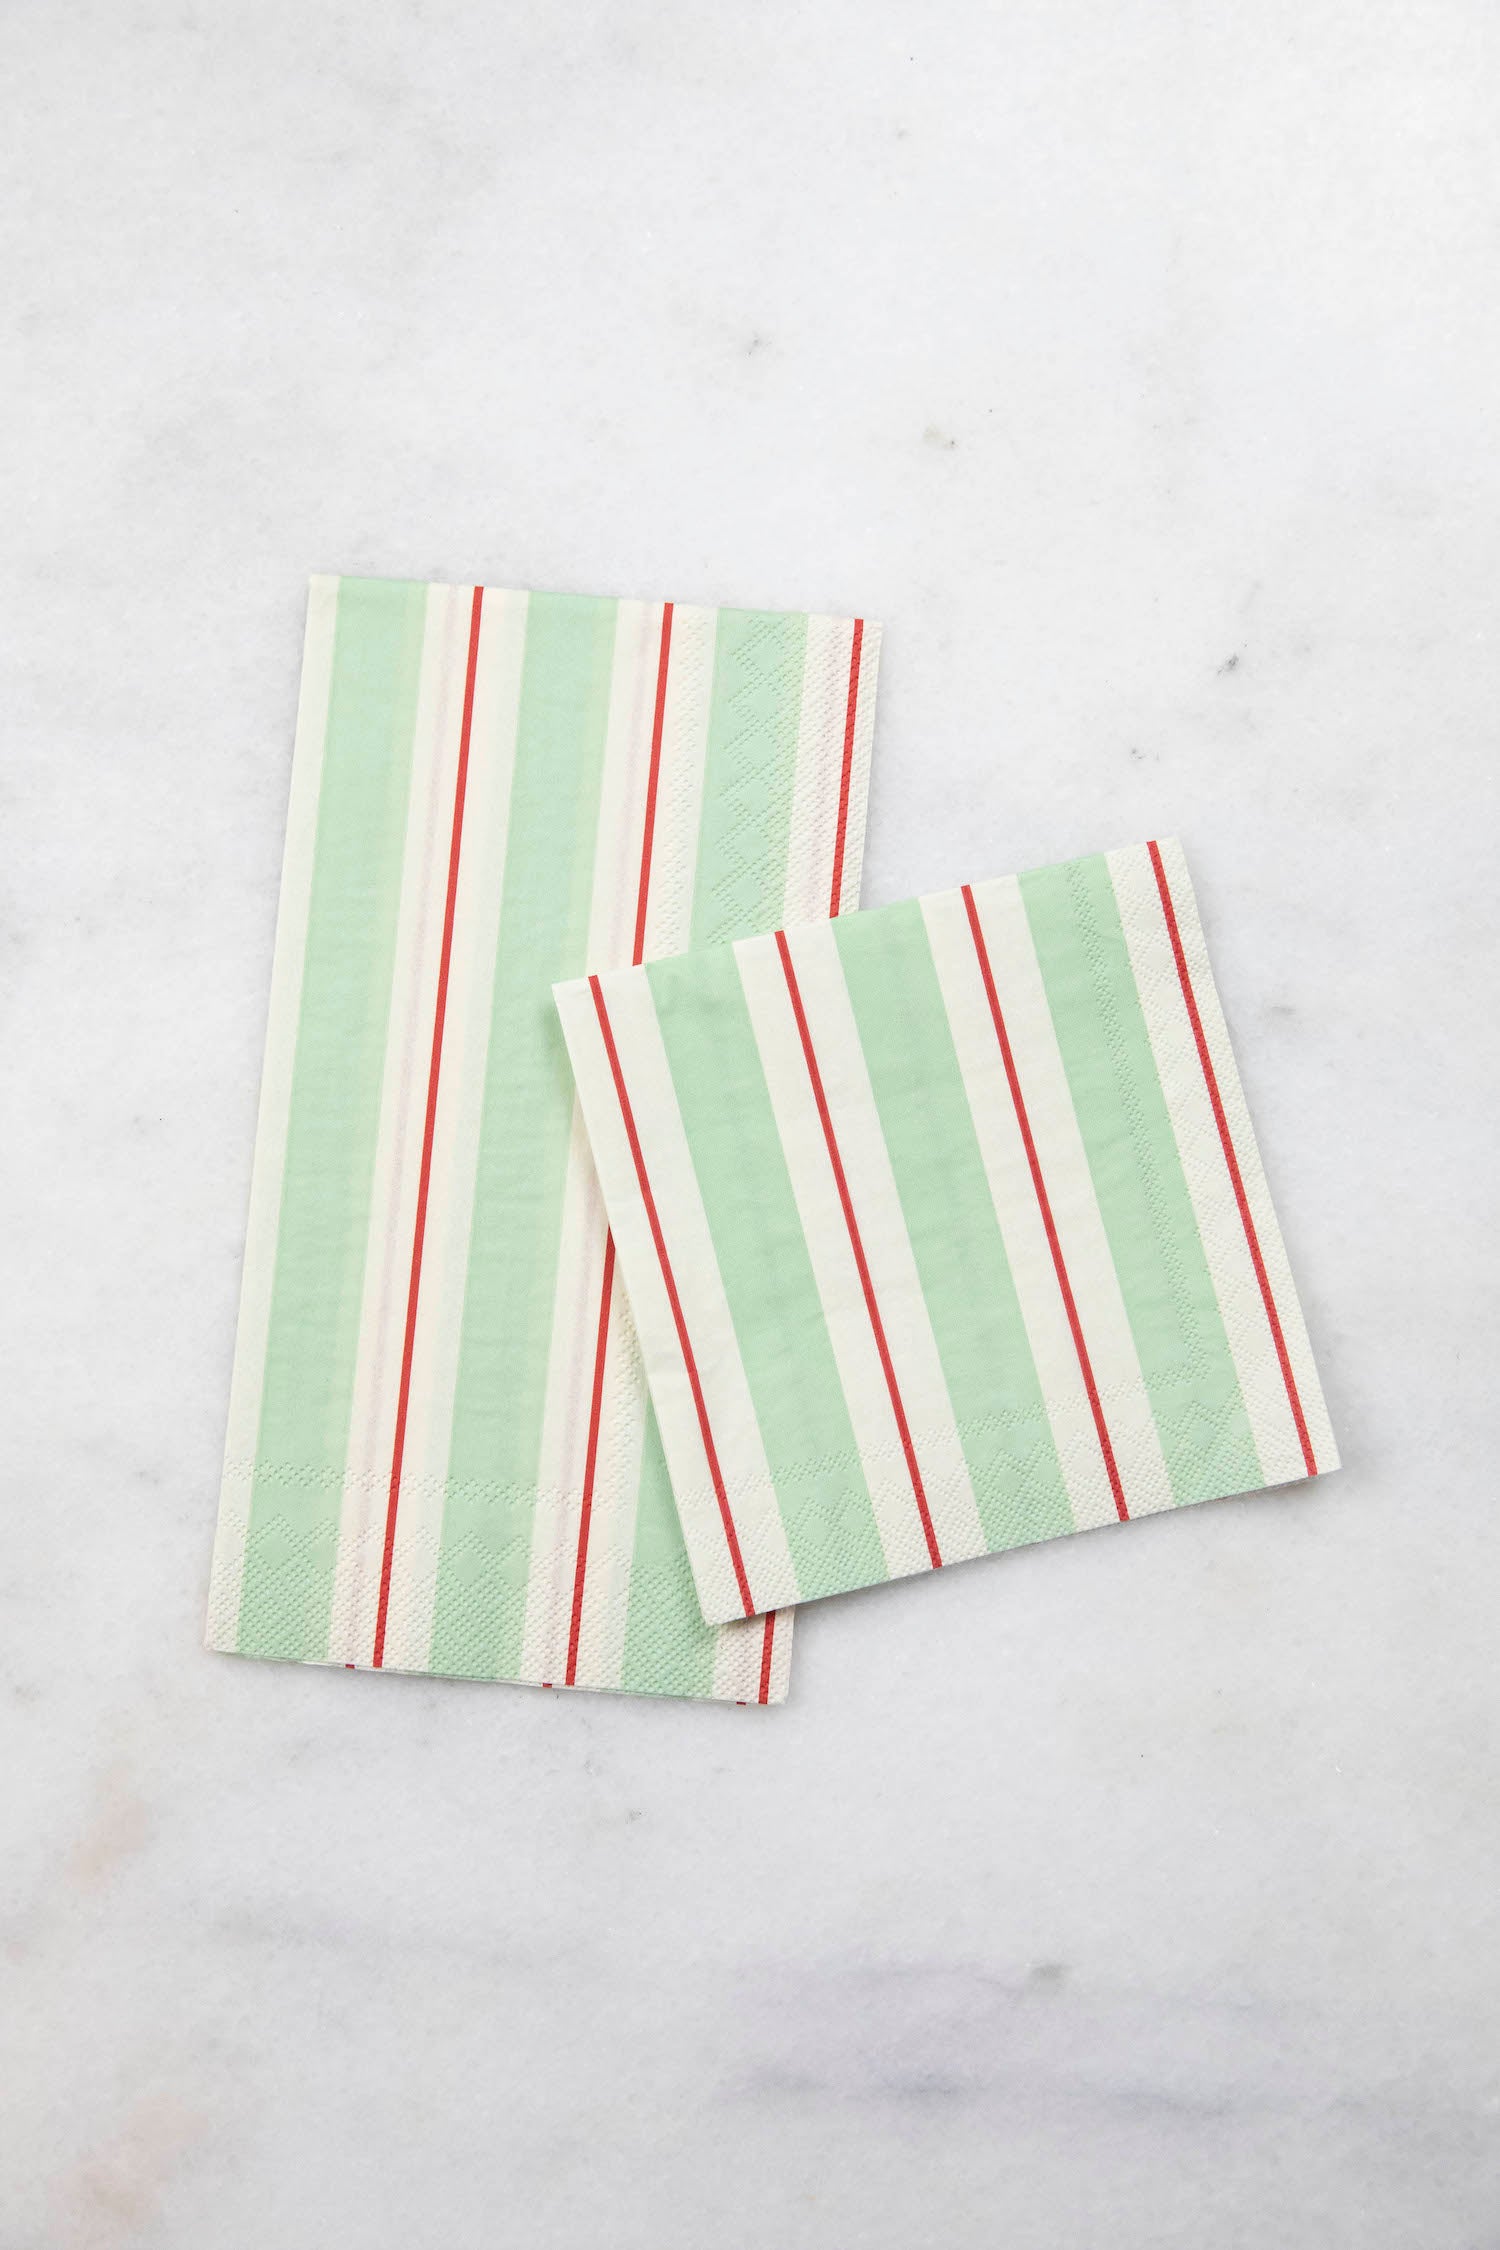 Two Seafoam &amp; Red Awning Stripe Napkins, one Guest and one Cocktail, by Hester &amp; Cook on a table.